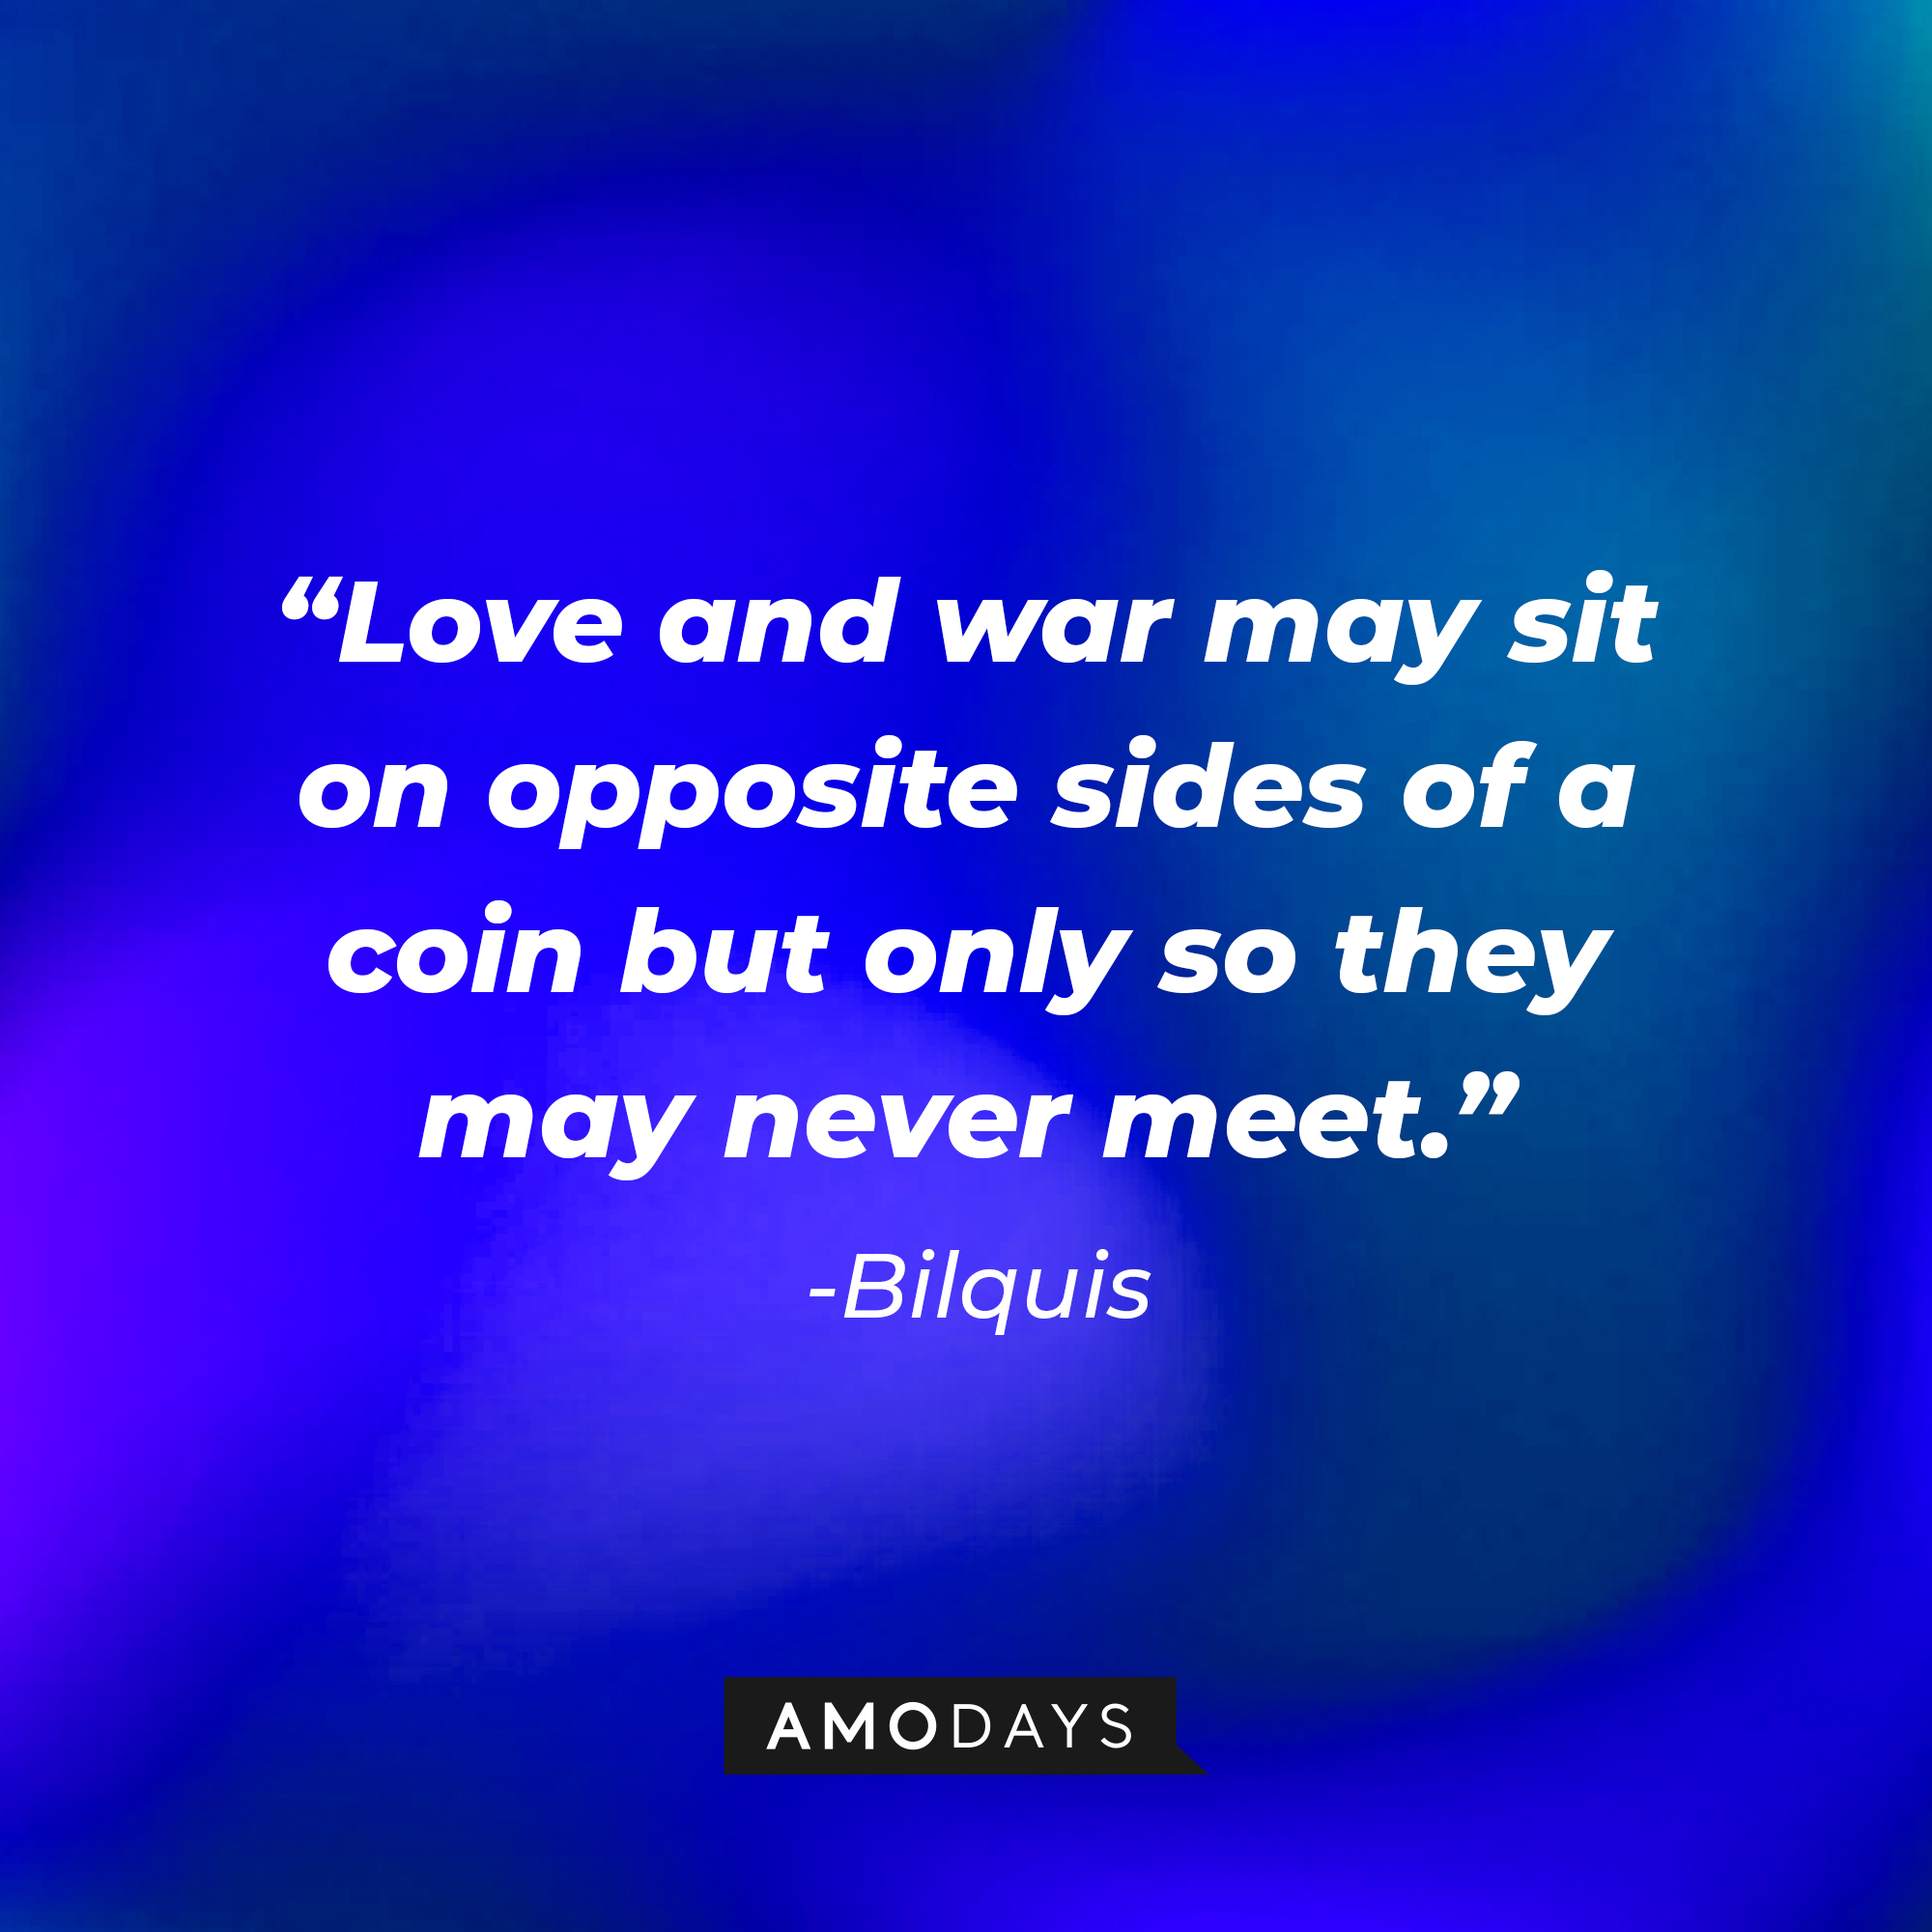 Bilquis' quote: "Love and war may sit on opposite sides of a coin but only so they may never meet." | Source: Amodays